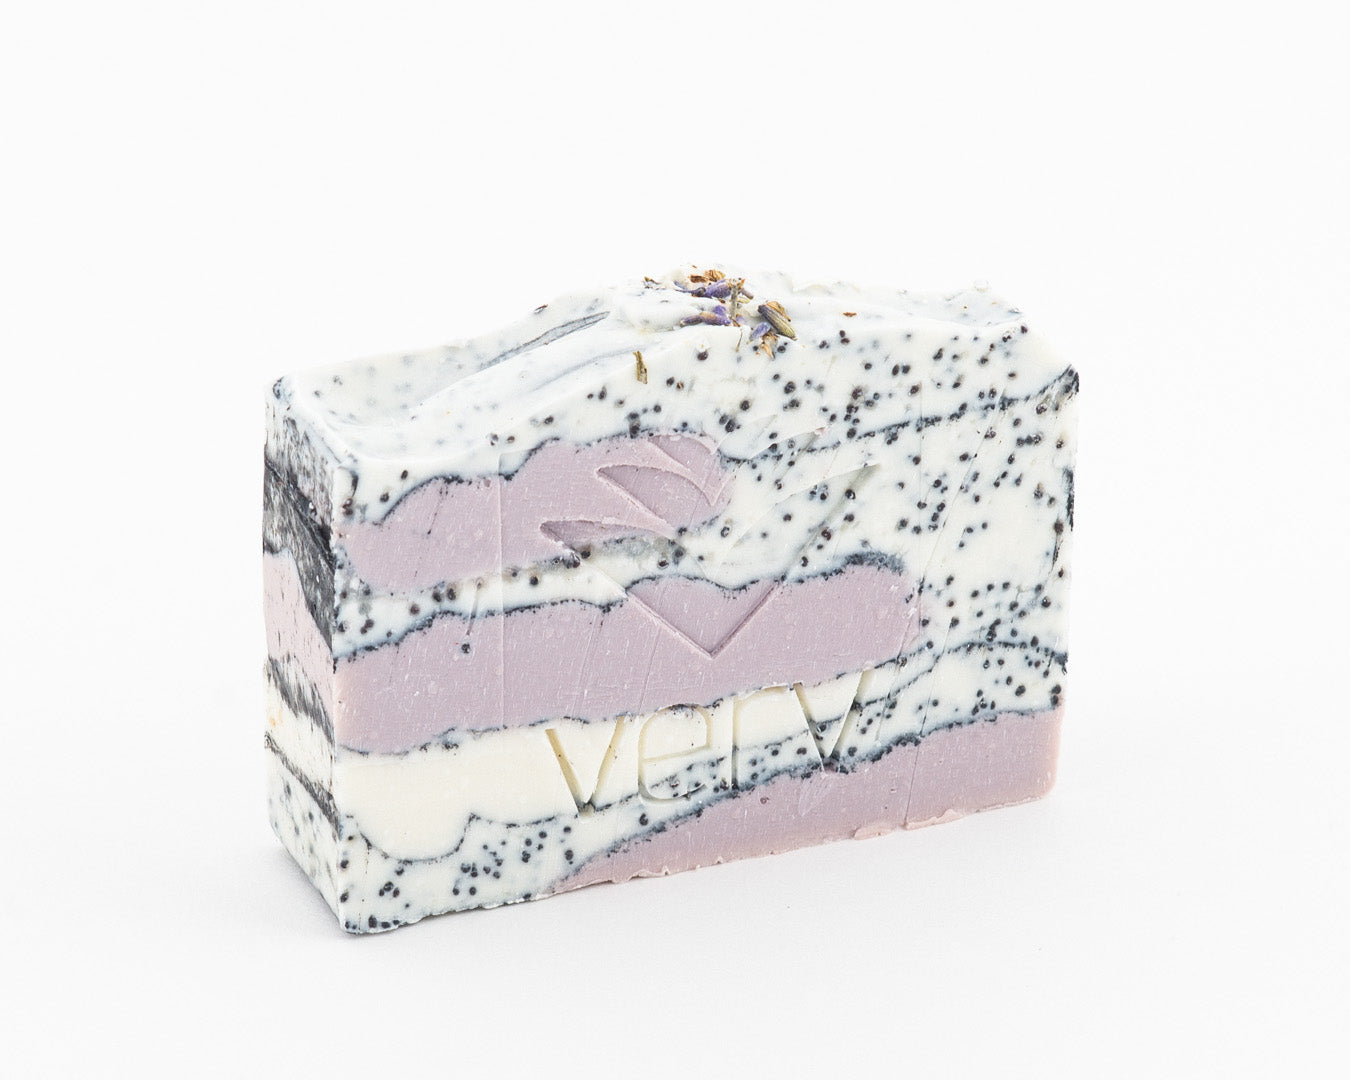 The Gardener | Lavender and Rosemary Exfoliating Soap